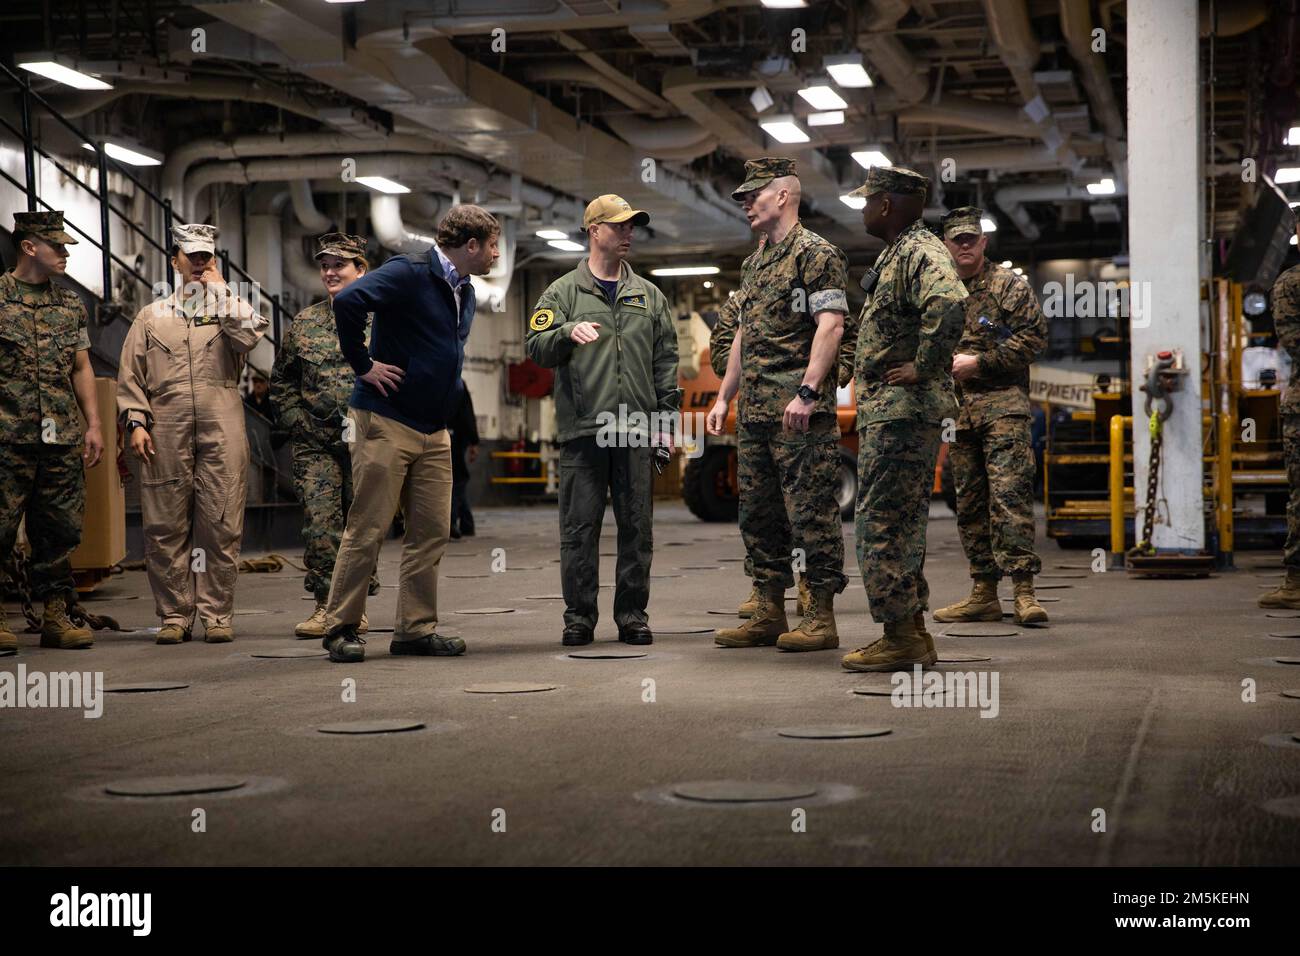 220322-N-LZ839-1689  NORFOLK, VA. (March 22, 2022) - Brig. Gen. Mark H. Clingan, Assistant Deputy Commandant, Combat Development and Integration, and the Capt. Joseph Murphy, commanding officer of the amphibious assault ship USS Bataan (LHD 5), tour the upper vehicle stowage area, March 22, 2022. Bataan is homeported at Naval Station Norfolk. Stock Photo